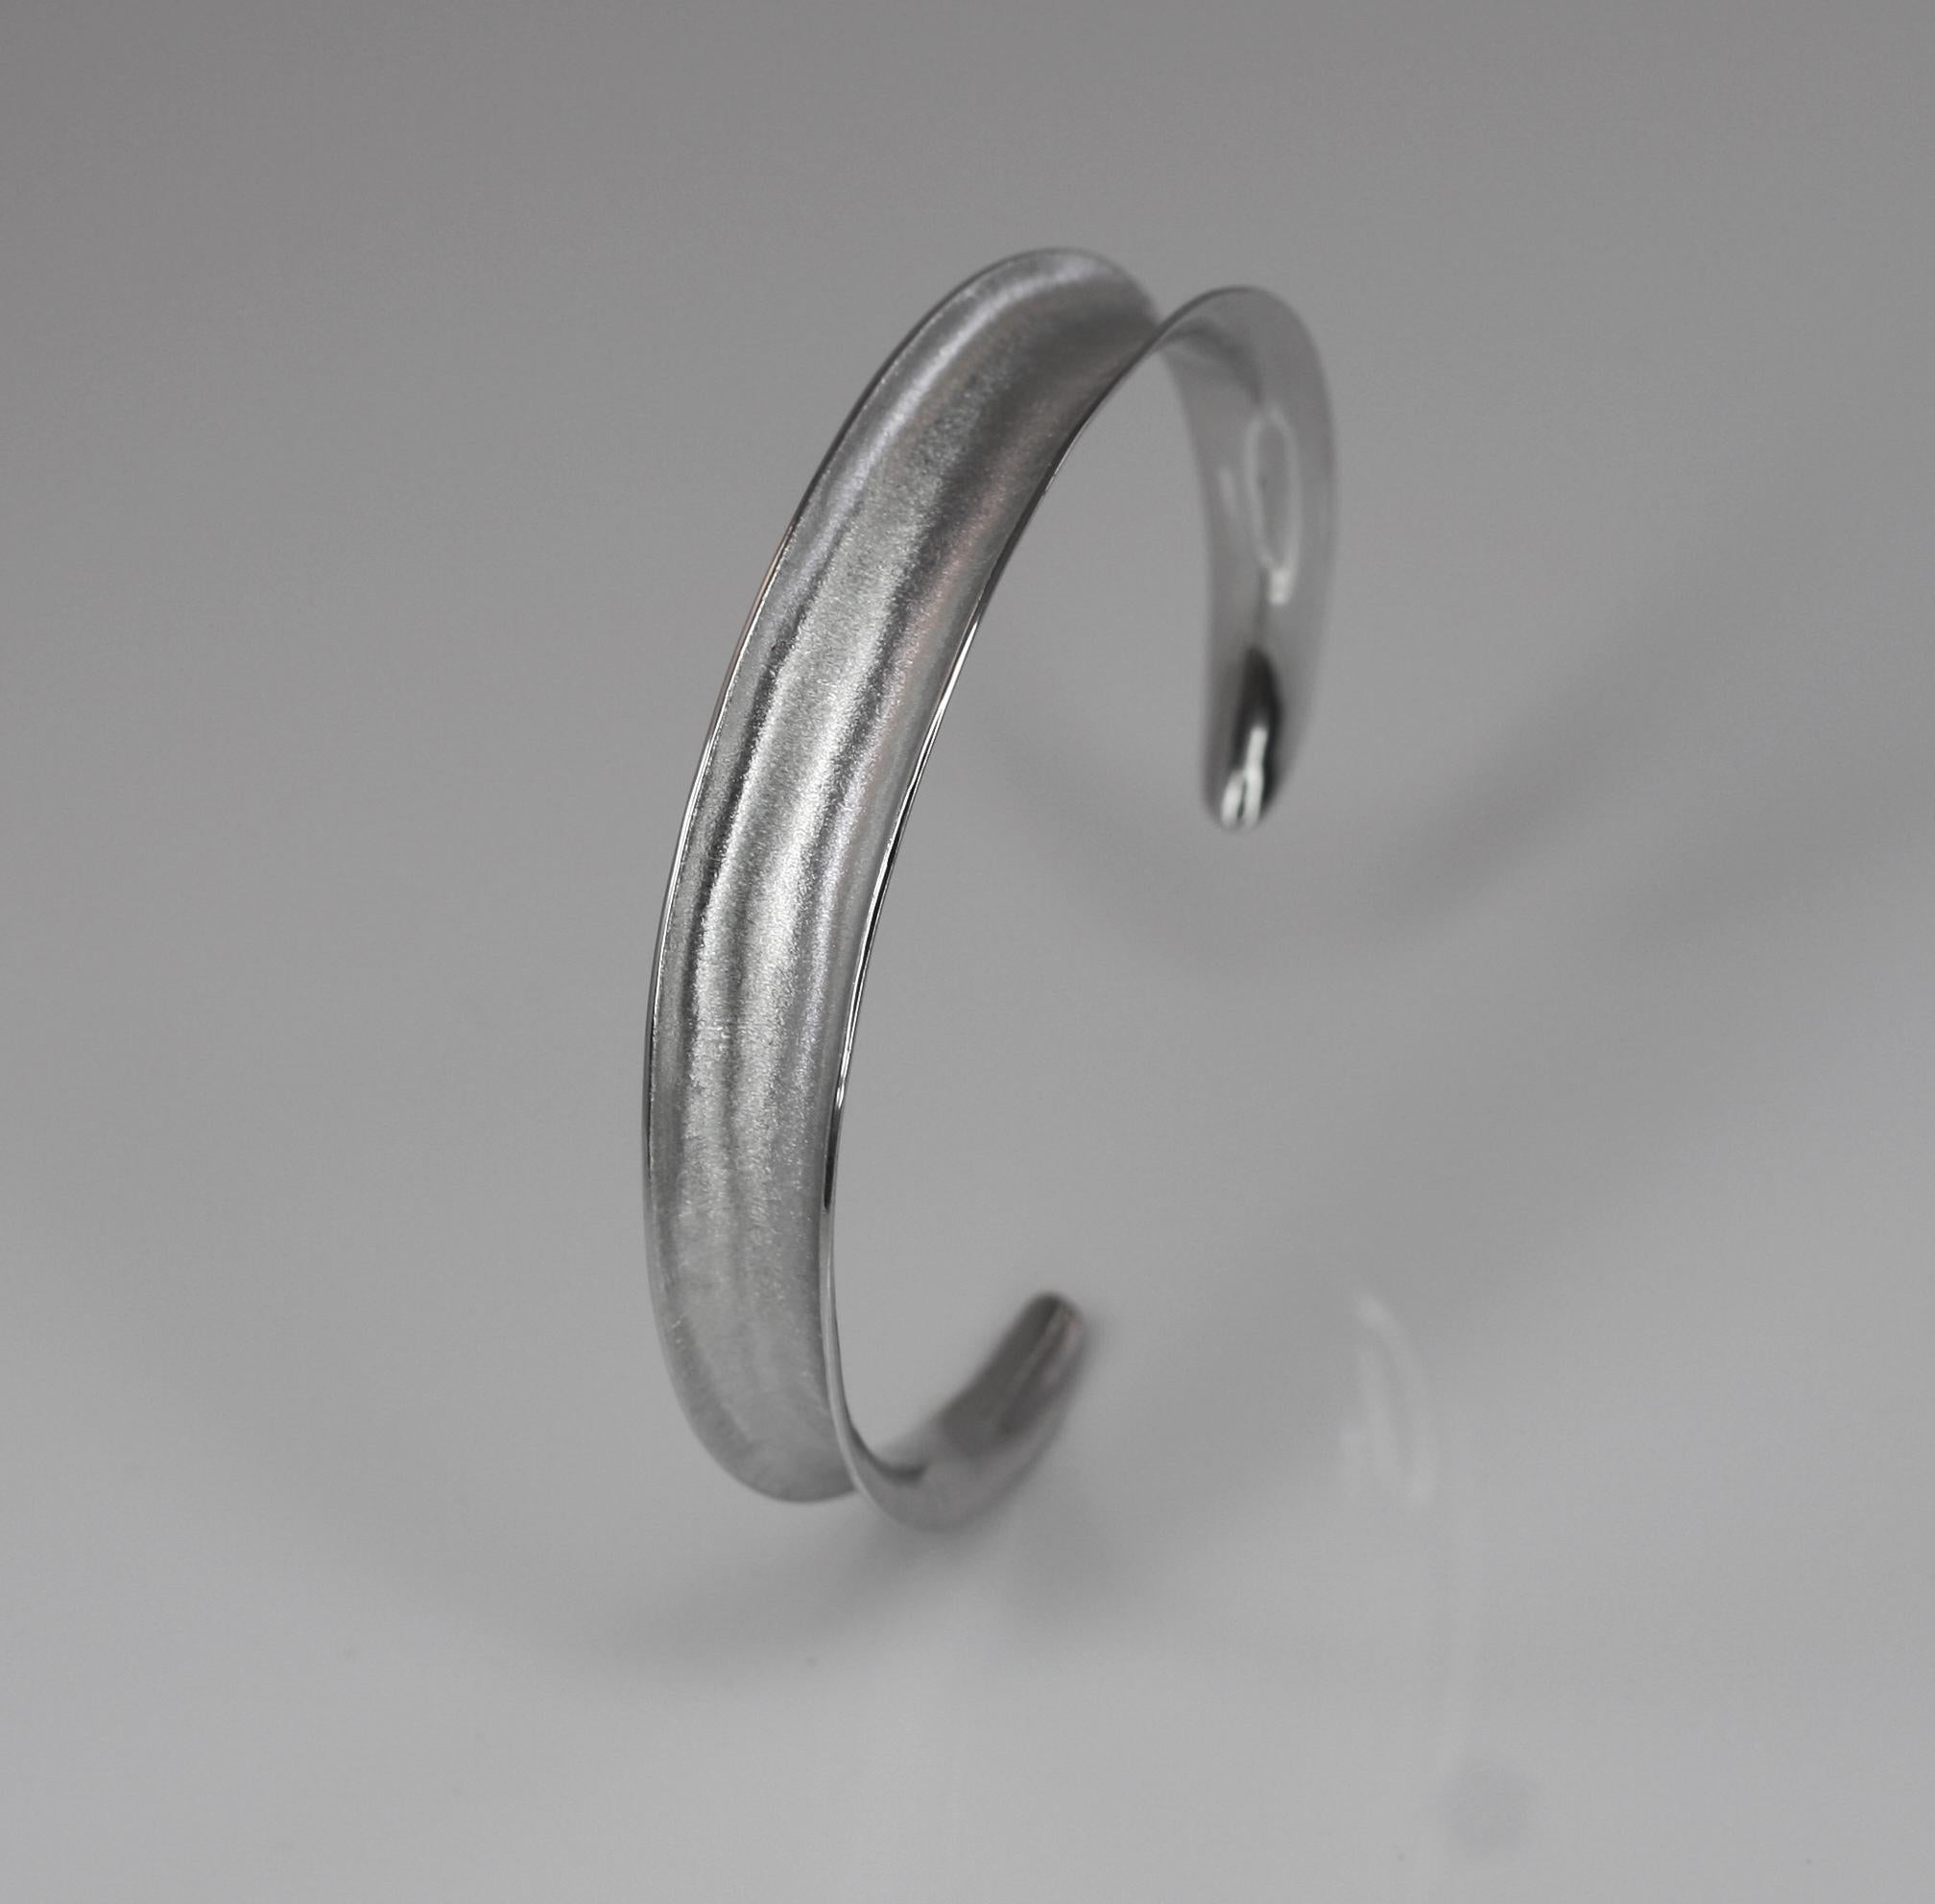 Yianni Creations artisan bracelet from handcrafted in Greece from fine silver 950 purity and plated with palladium to resist against the elements. This elegant bangle bracelet is featuring a unique surface created by the ancient technique of